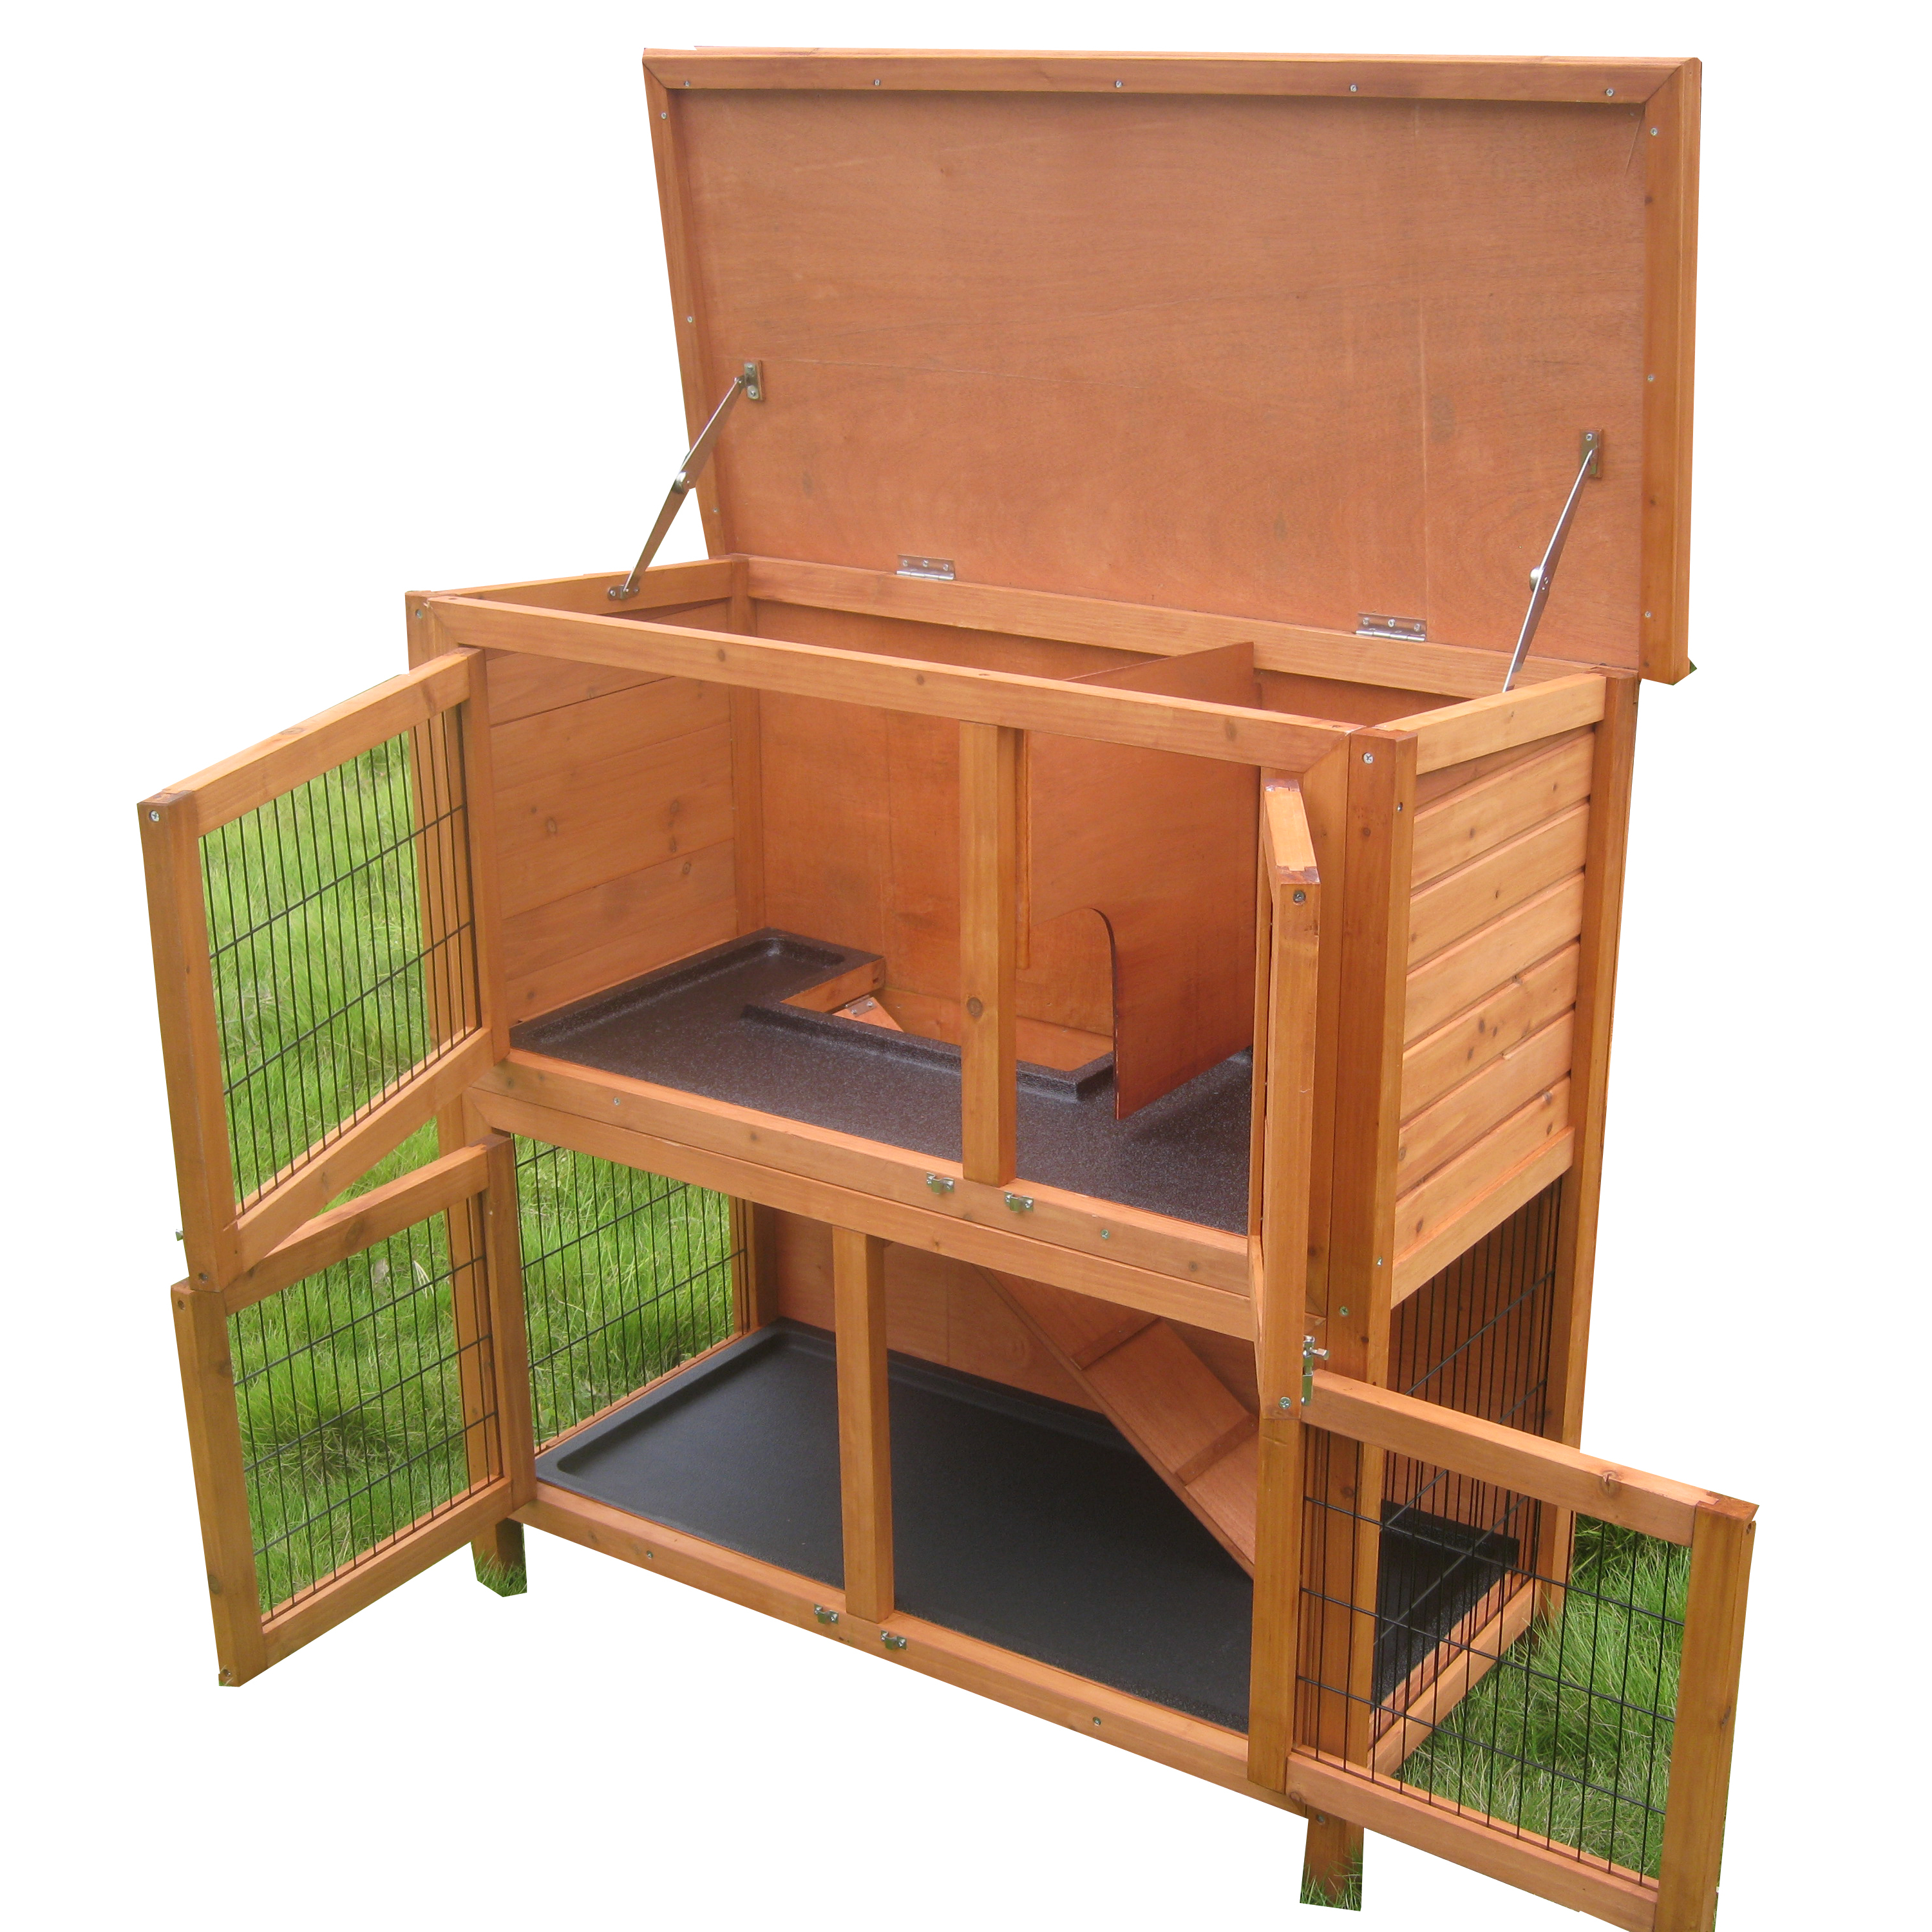 Factory selling Dog House Outdoor -
 Cheap Outdoor Garden Backyard commercial Large two storey Wood Industrial Habitats ferret Guinea Pig Bunny Cages Rabbit hutch – Easy